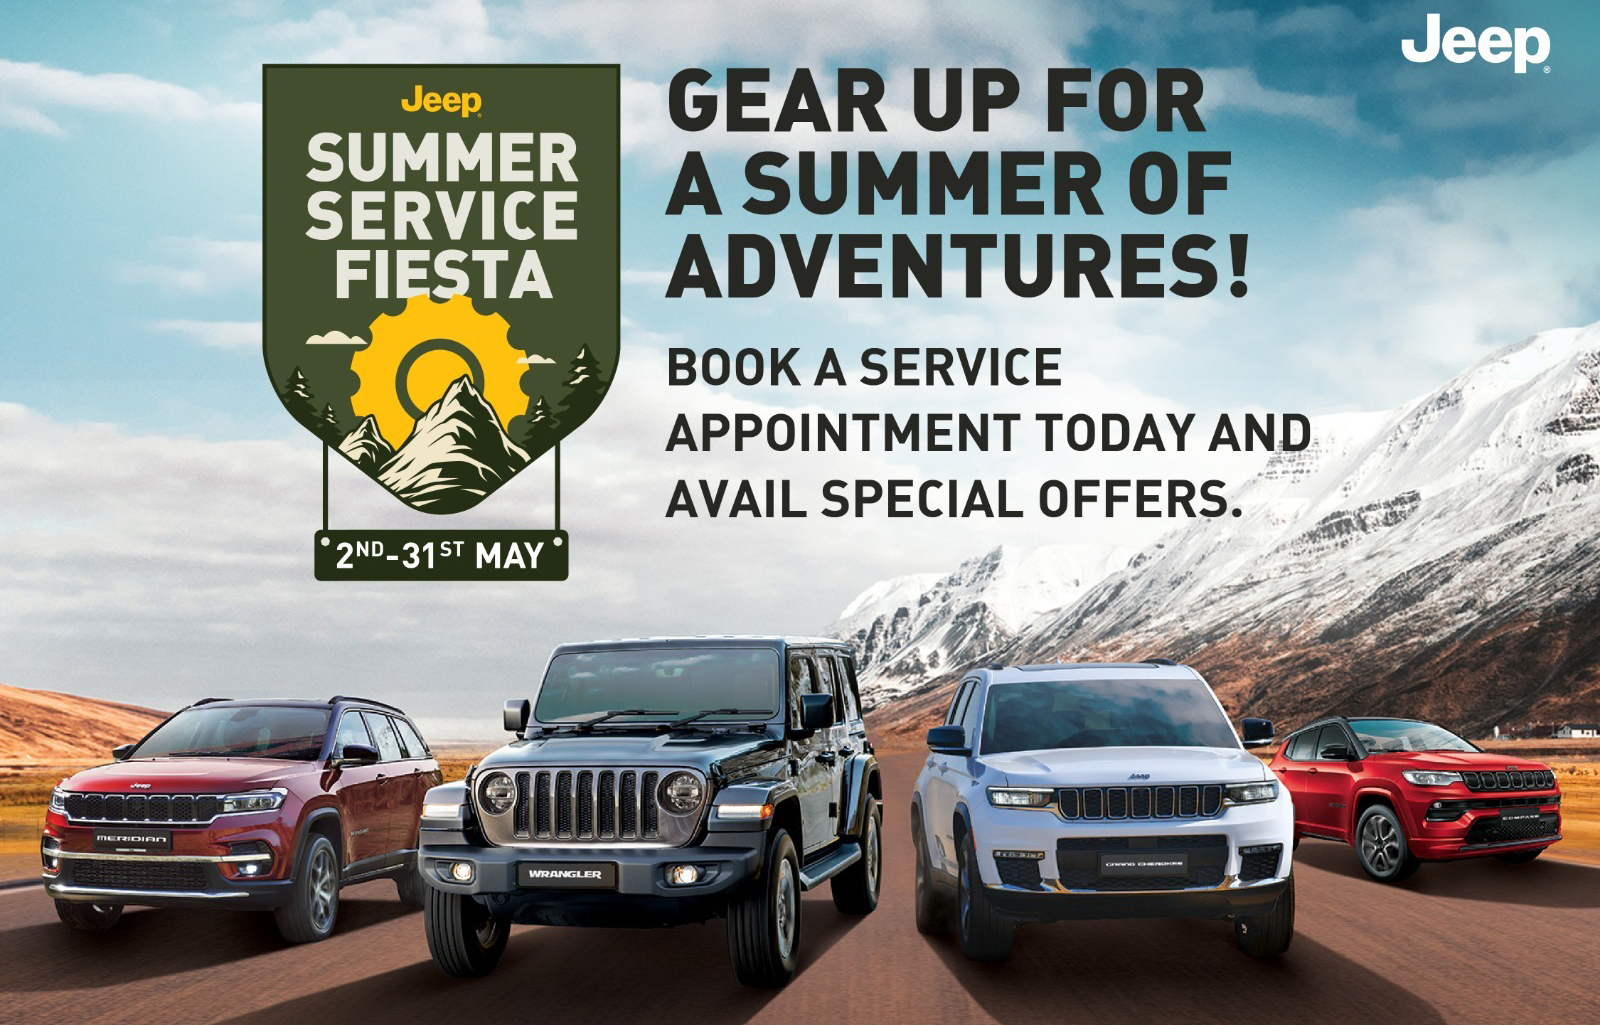 Jeep India launches exciting offers and discounts for customers at the Jeep Summer Service Fiesta